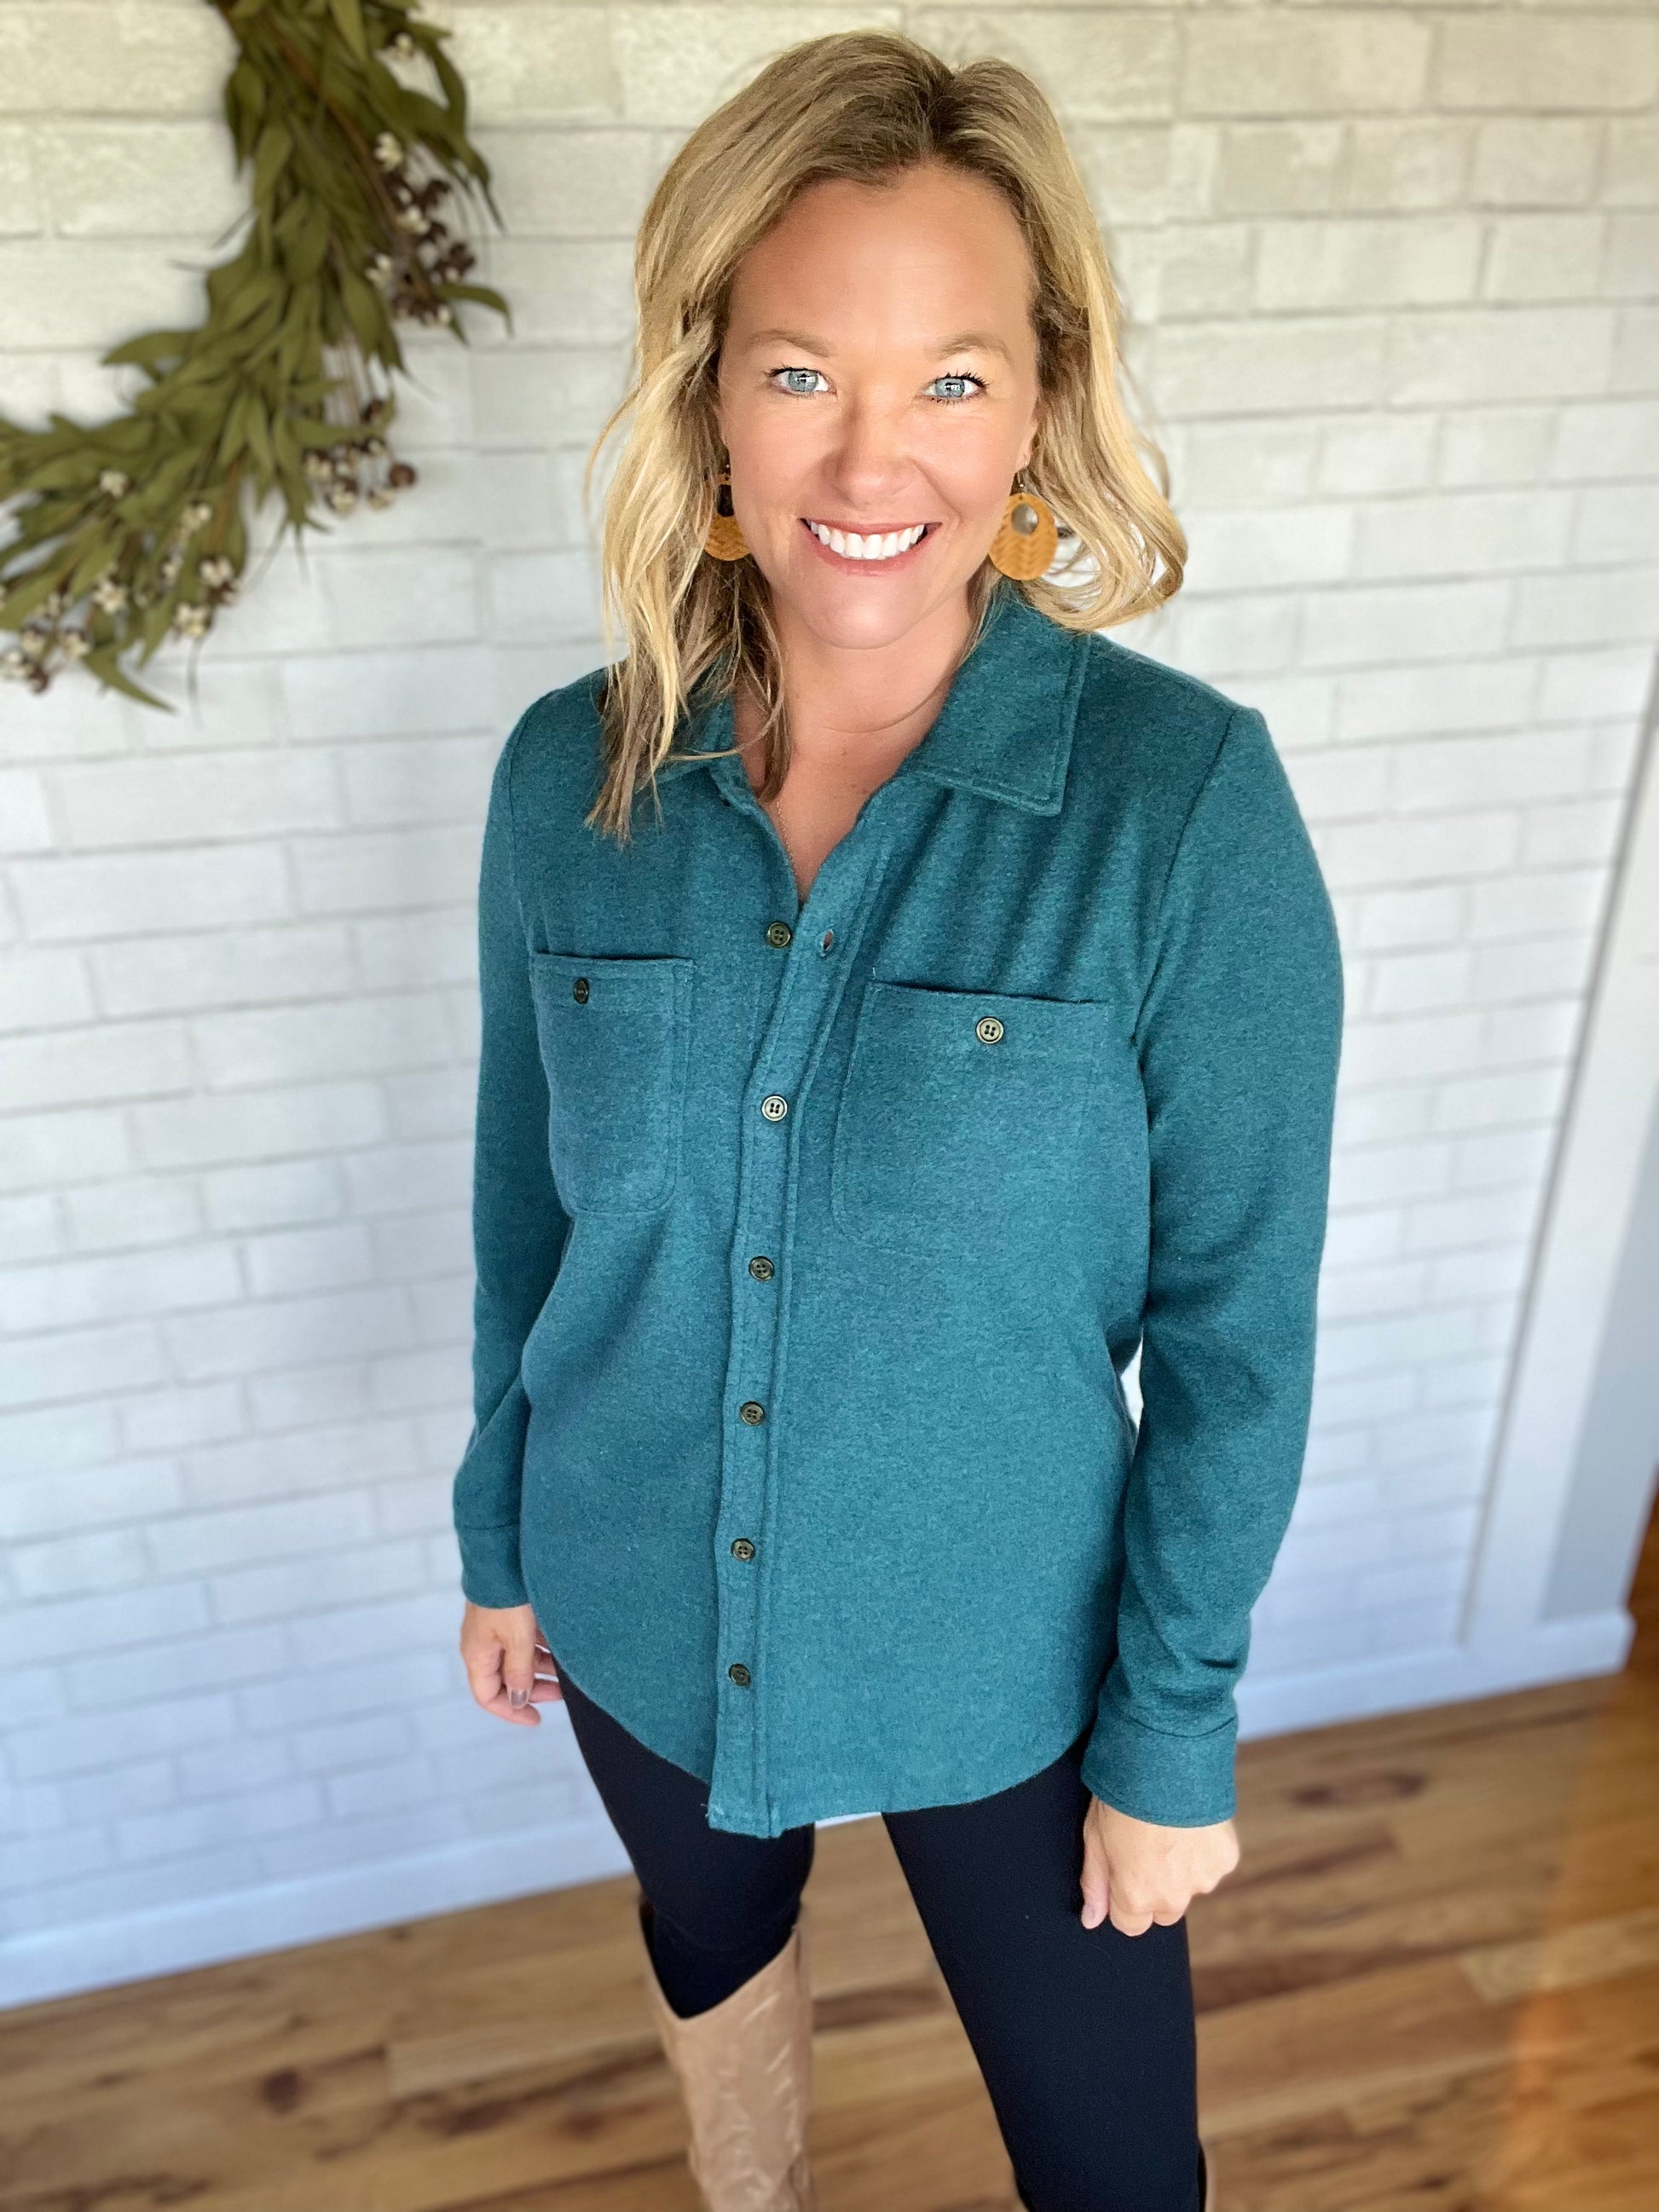 Comfy shirt jacket in a flecked blue-green color. Fit is true to size.